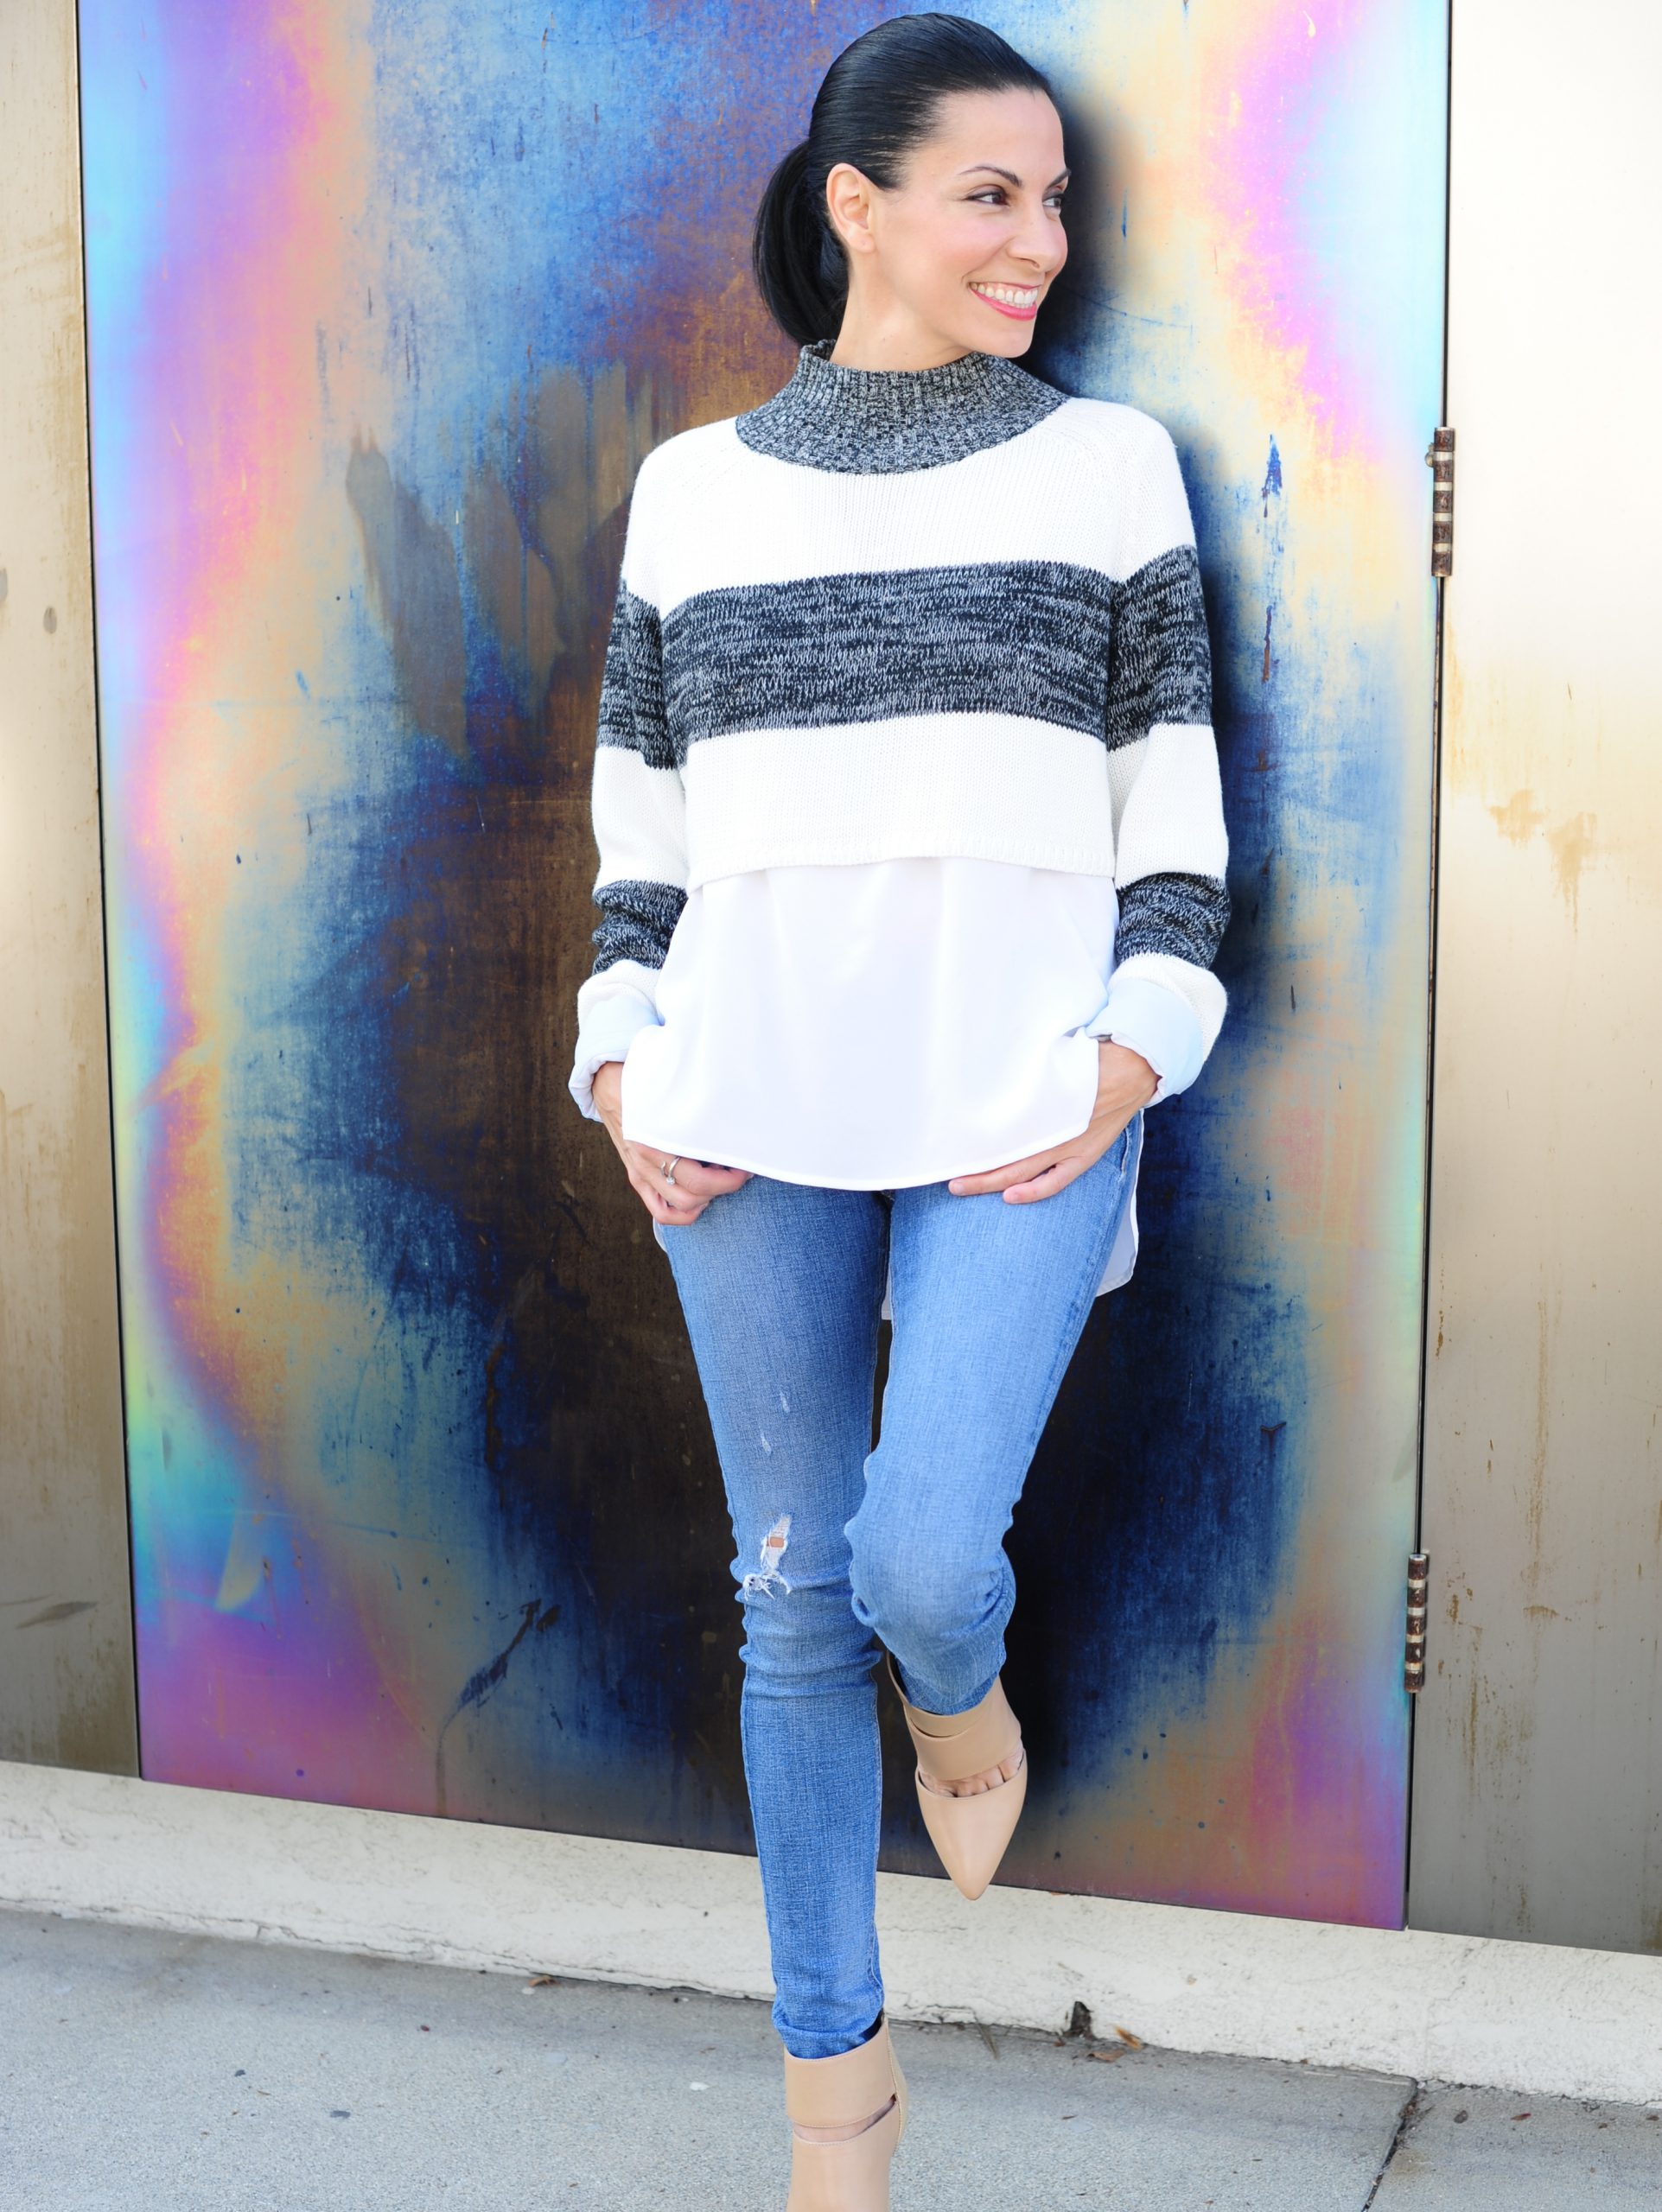 Crop Top Sweater - Evil Twin Striped Crop Top Sweater - Dylan Gray Blouse